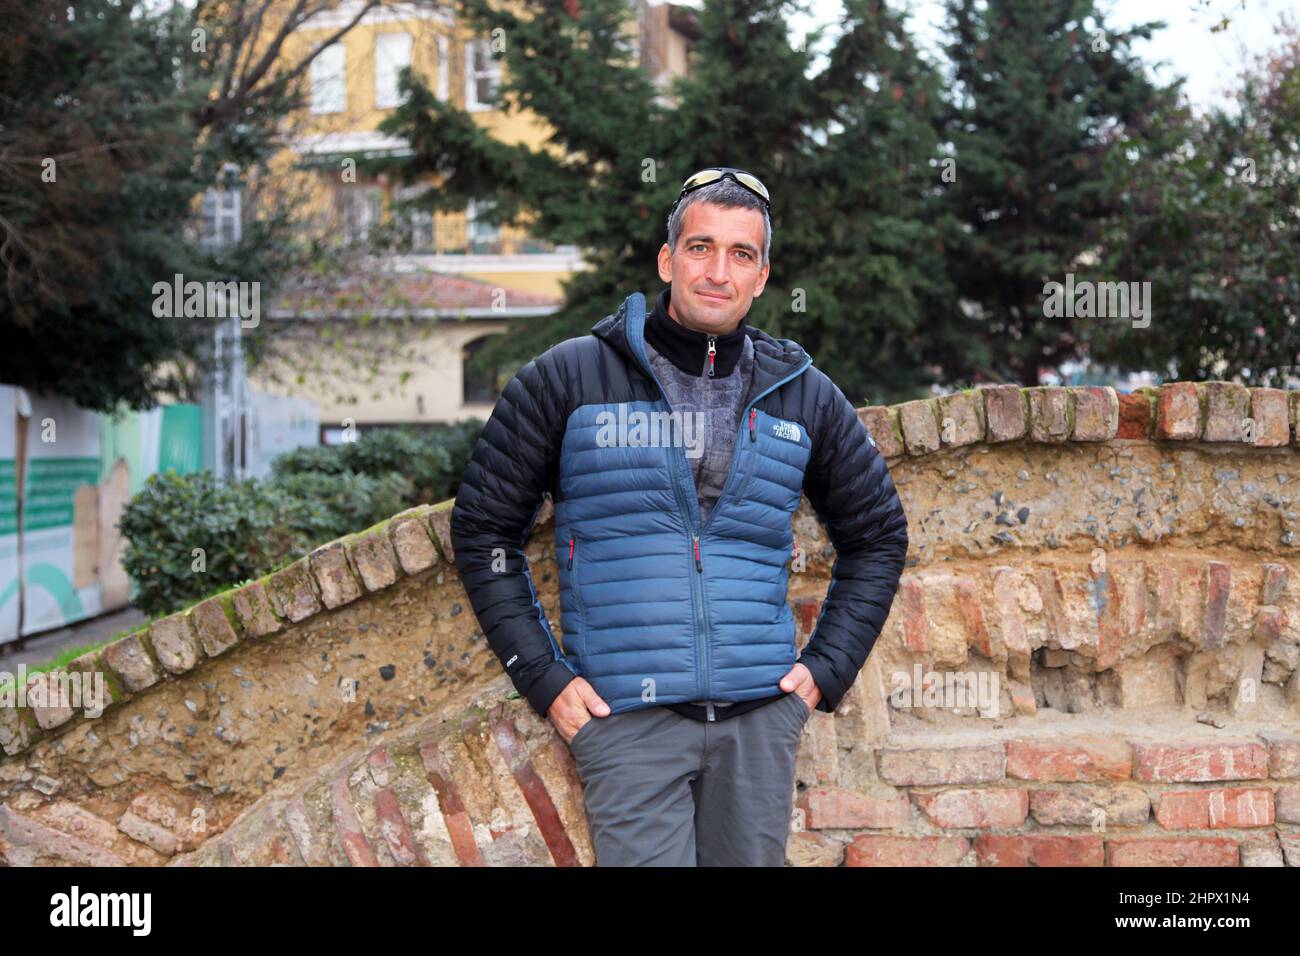 ISTANBUL, TURKEY - DECEMBER 24: Turkish mountain climber and writer Tunc Findik portrait on December 24, 2013 in Istanbul, Turkey. He became the second Turkish climber in the world who has climbed Mount Everest. Stock Photo